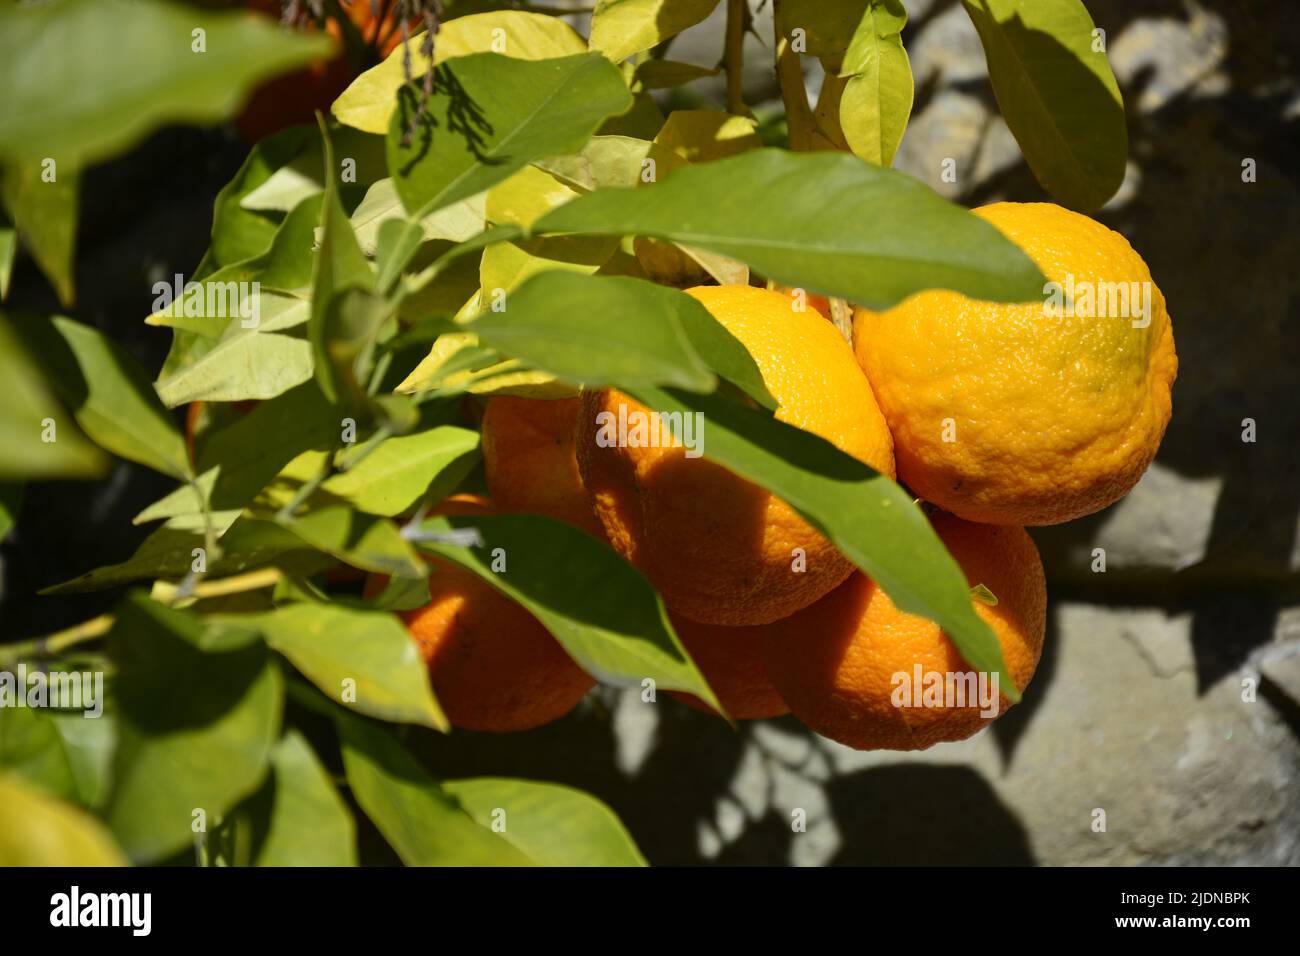 Oranges shining in the autumn sun ready to be picked for the winter season. Stock Photo